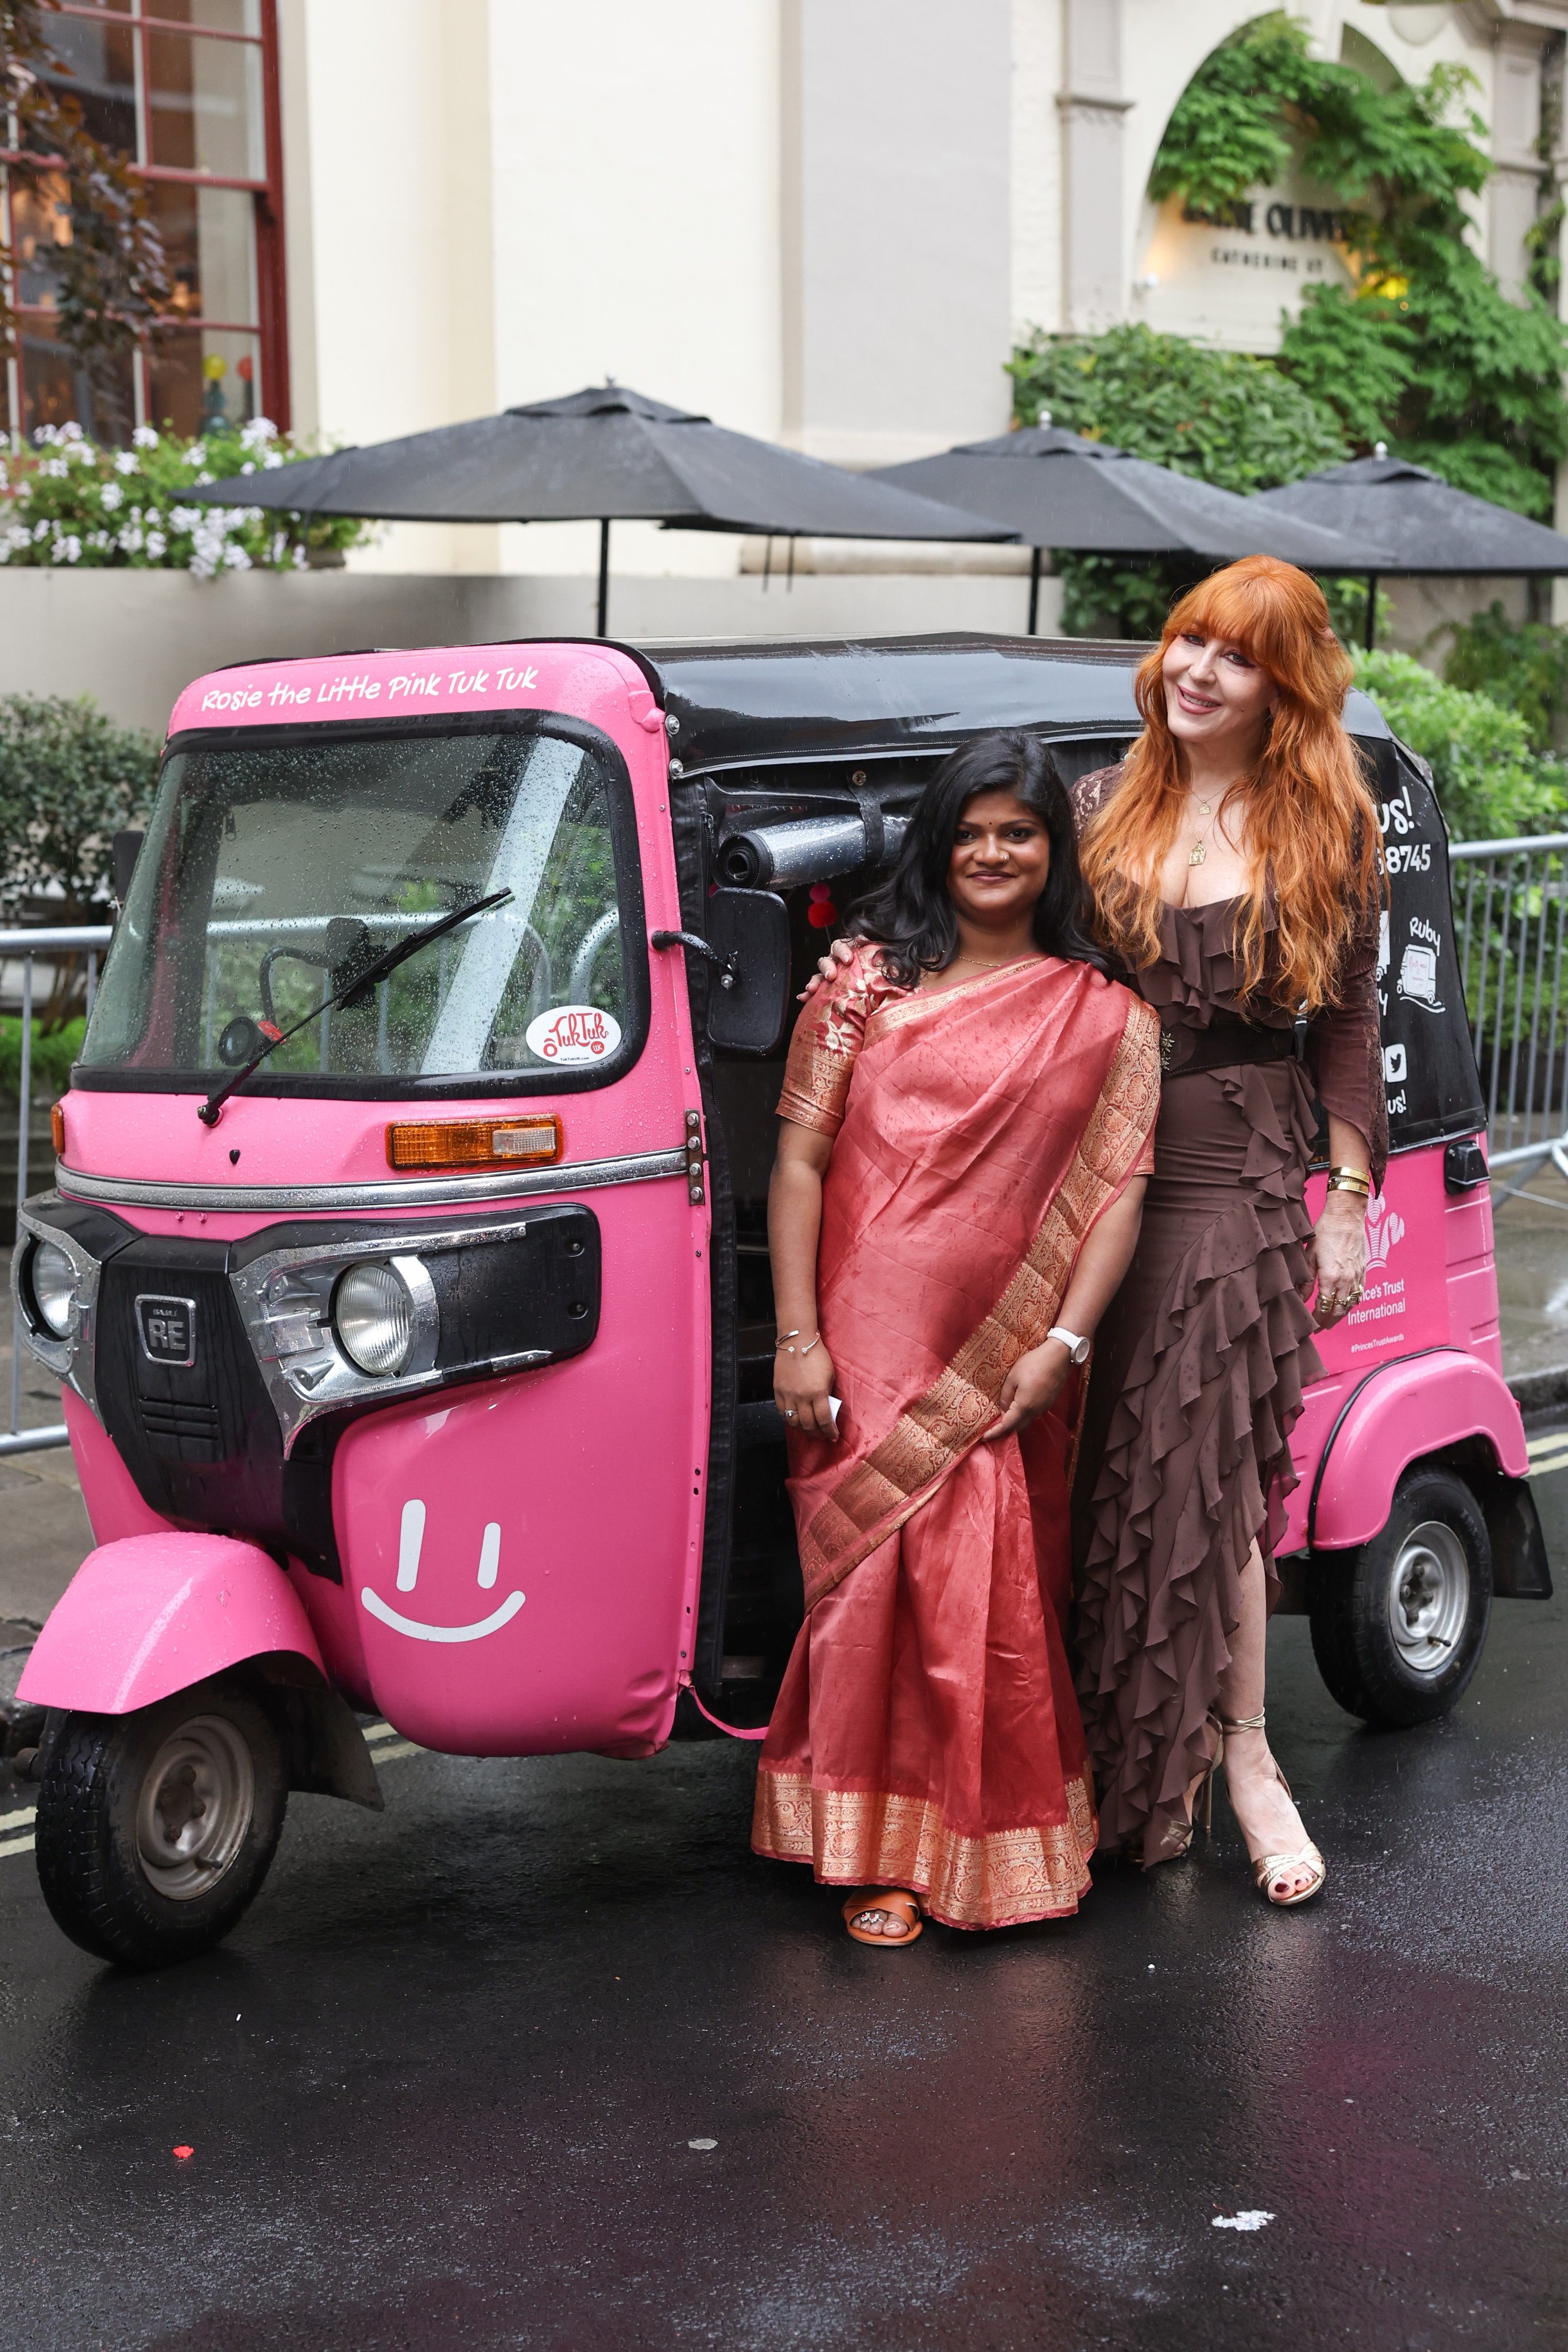 two women standing next to a pink vehicle